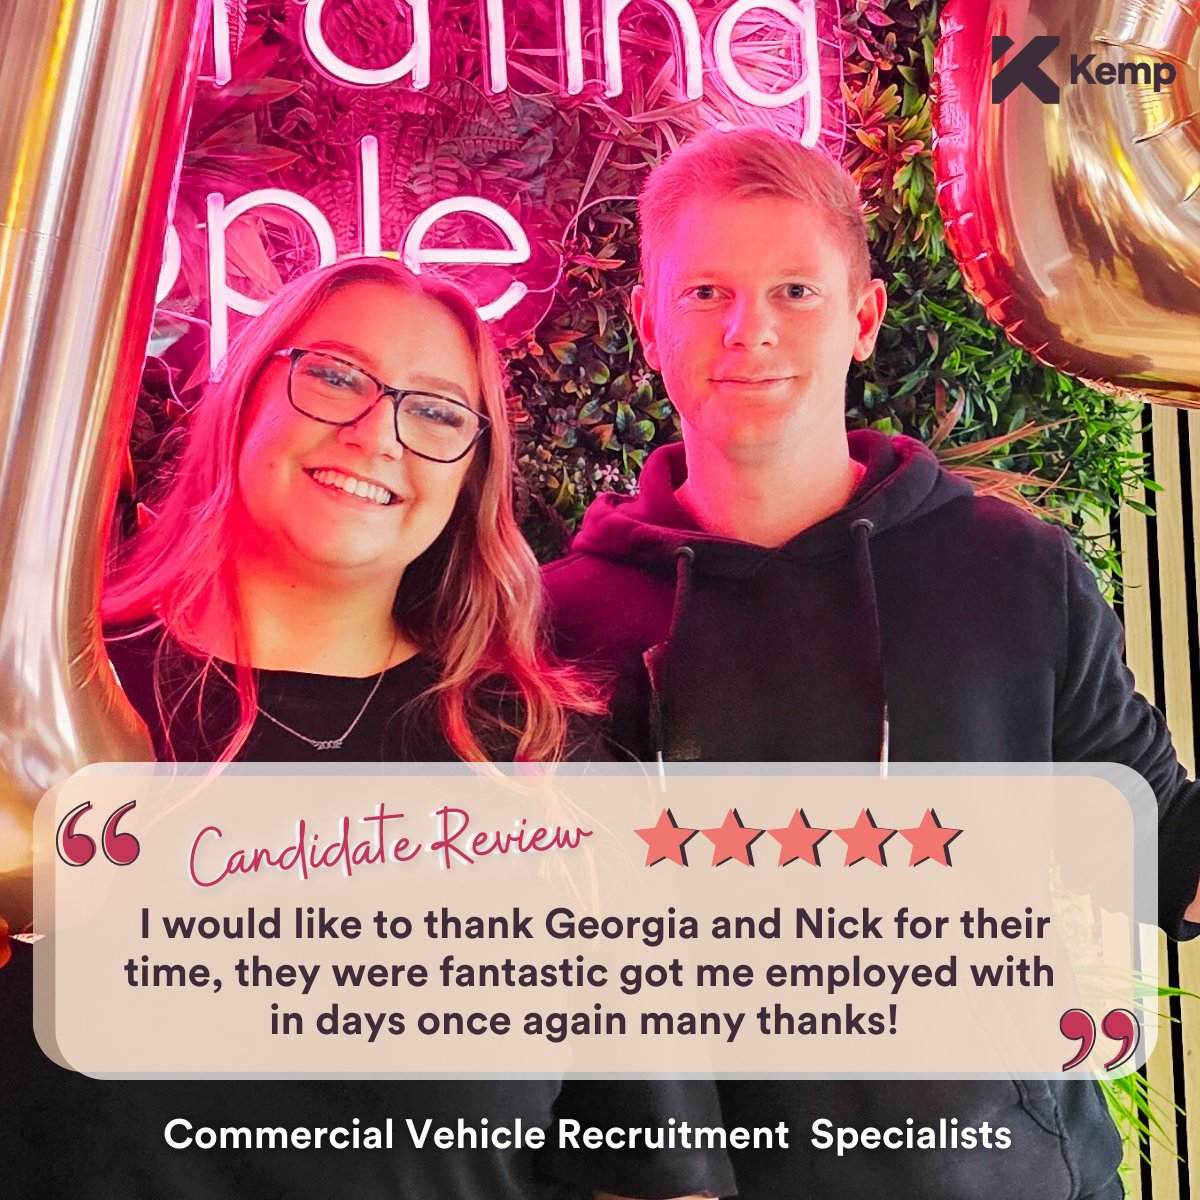 🌟 Testimonial Thursday 🌟
Cracking feedback for Nick & Georgia again - more top quality service & support to candidates. #testimonialthursday #fivestarreview #candidatereview #candidatetestimonial #customerservice #happycandidate #recruitmentspecialists #recruitmentagency